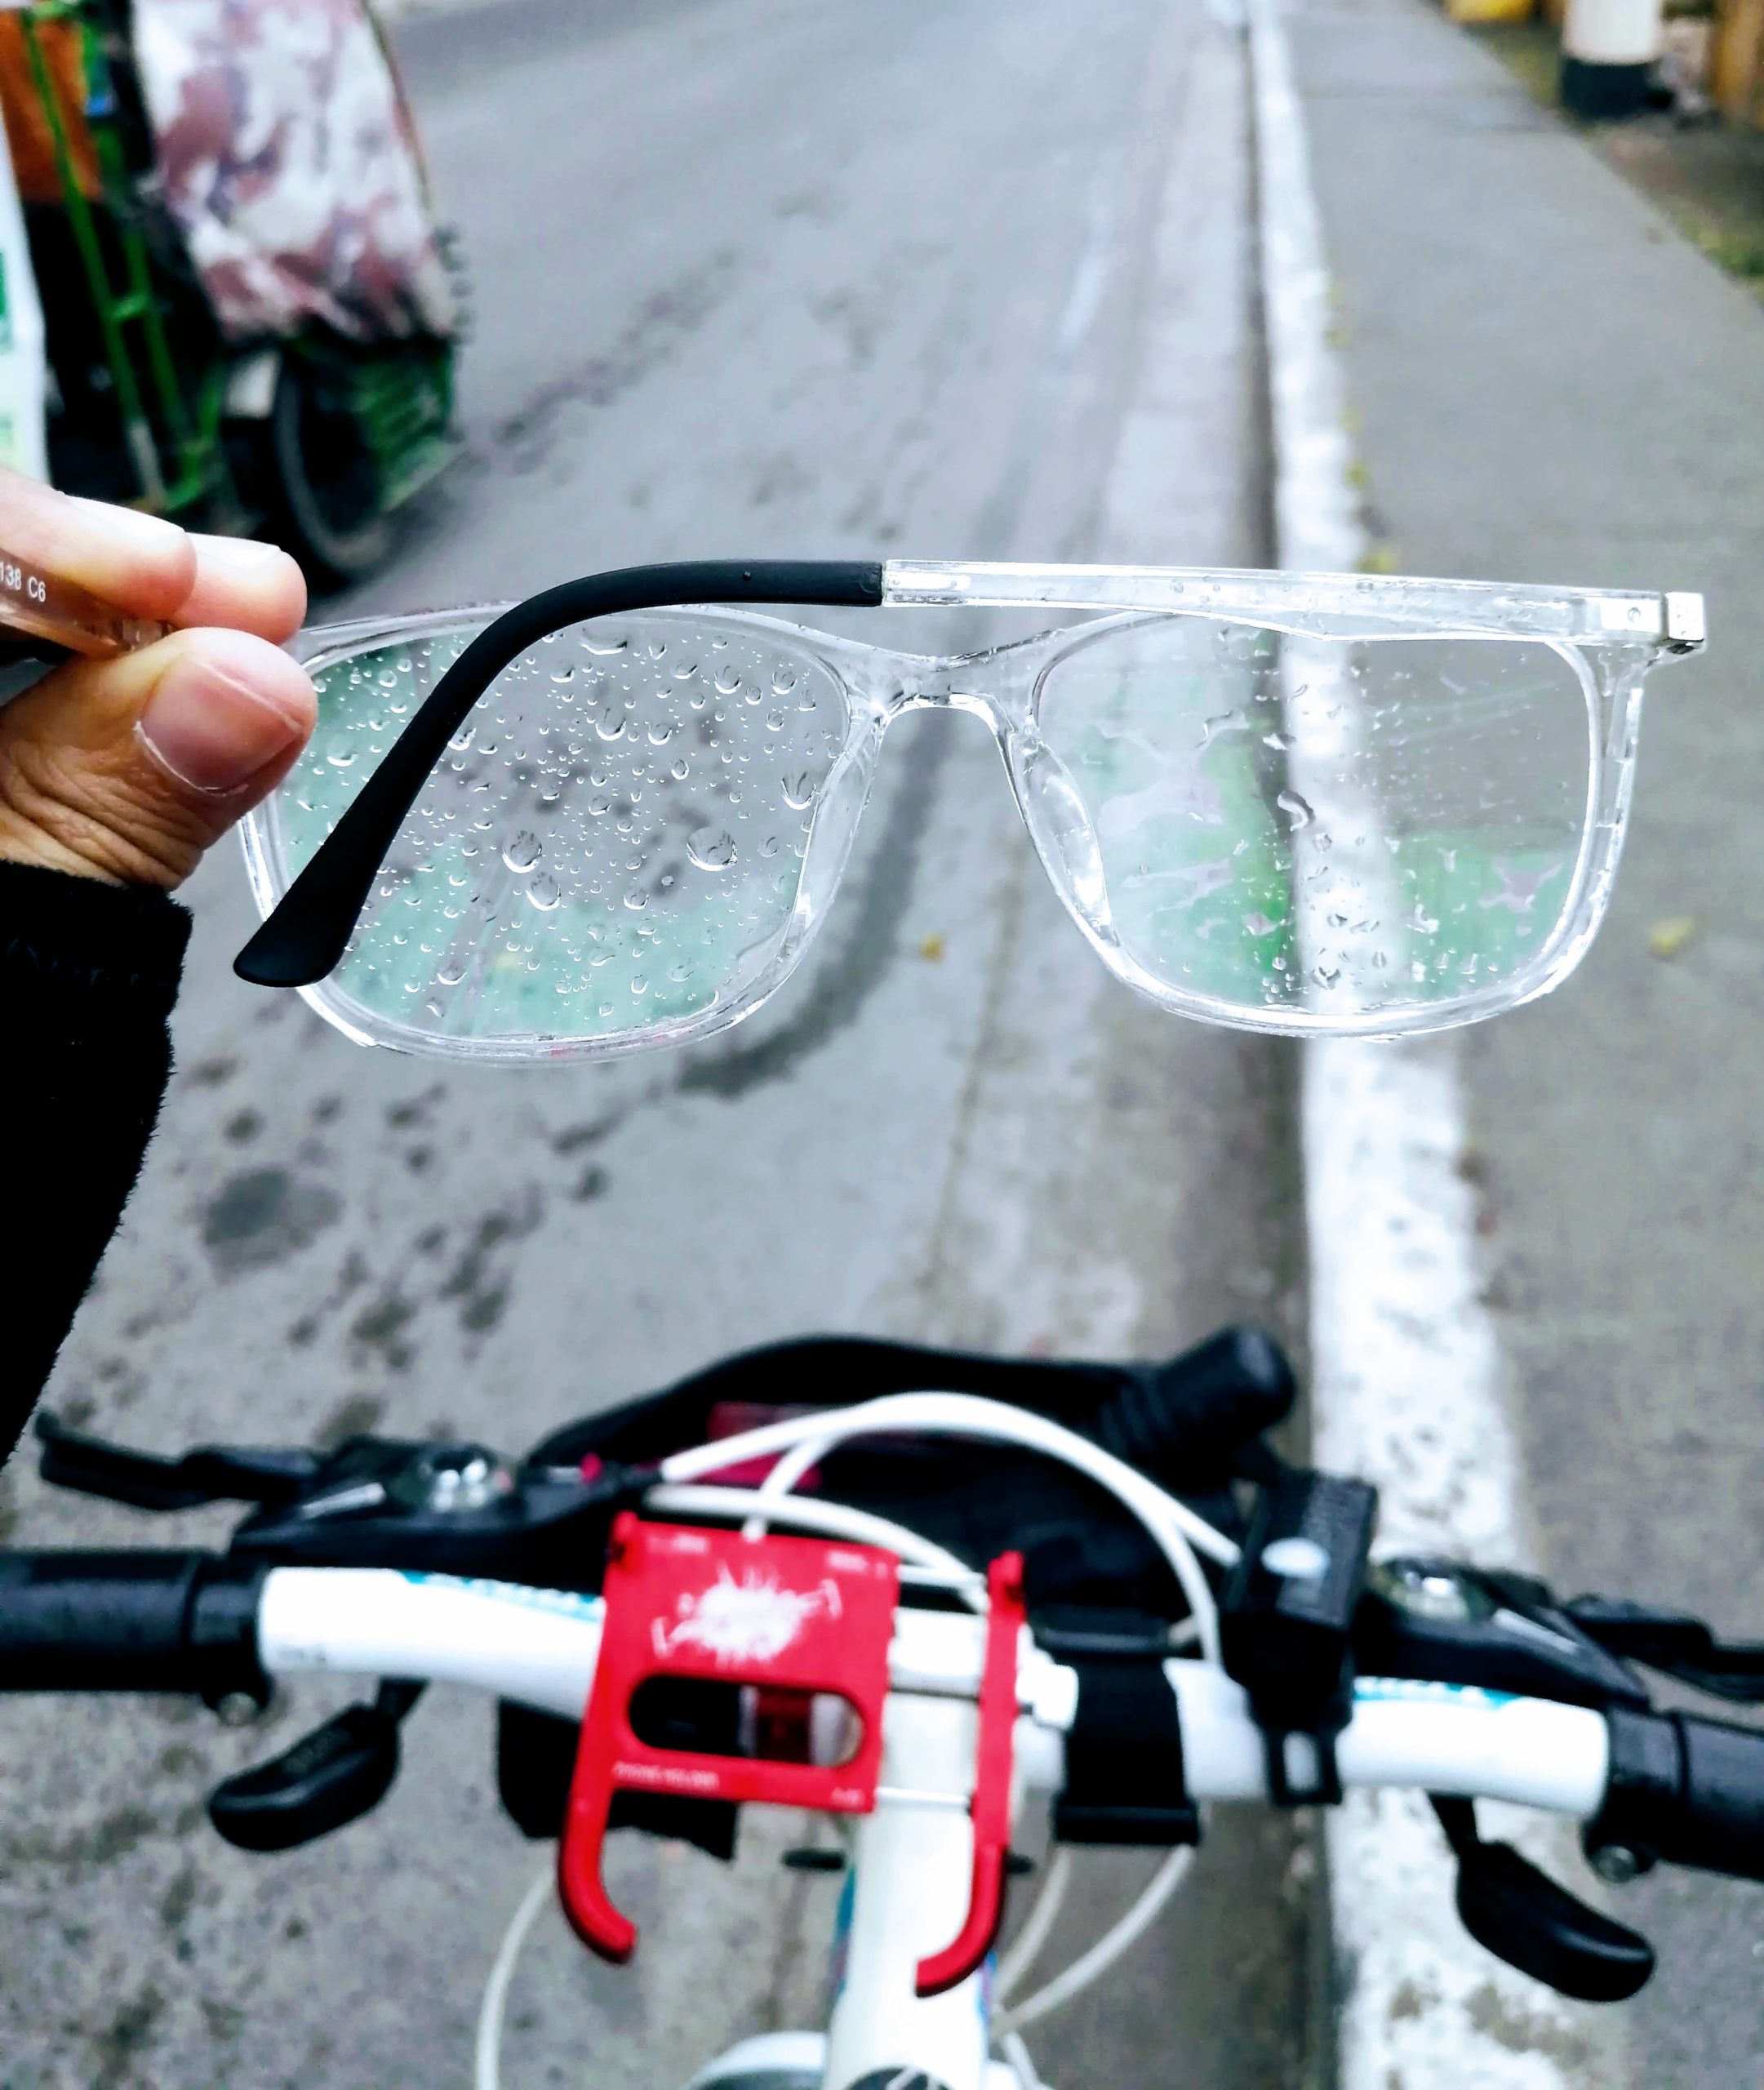 Eyeglasses drenched with rain while biking on the road